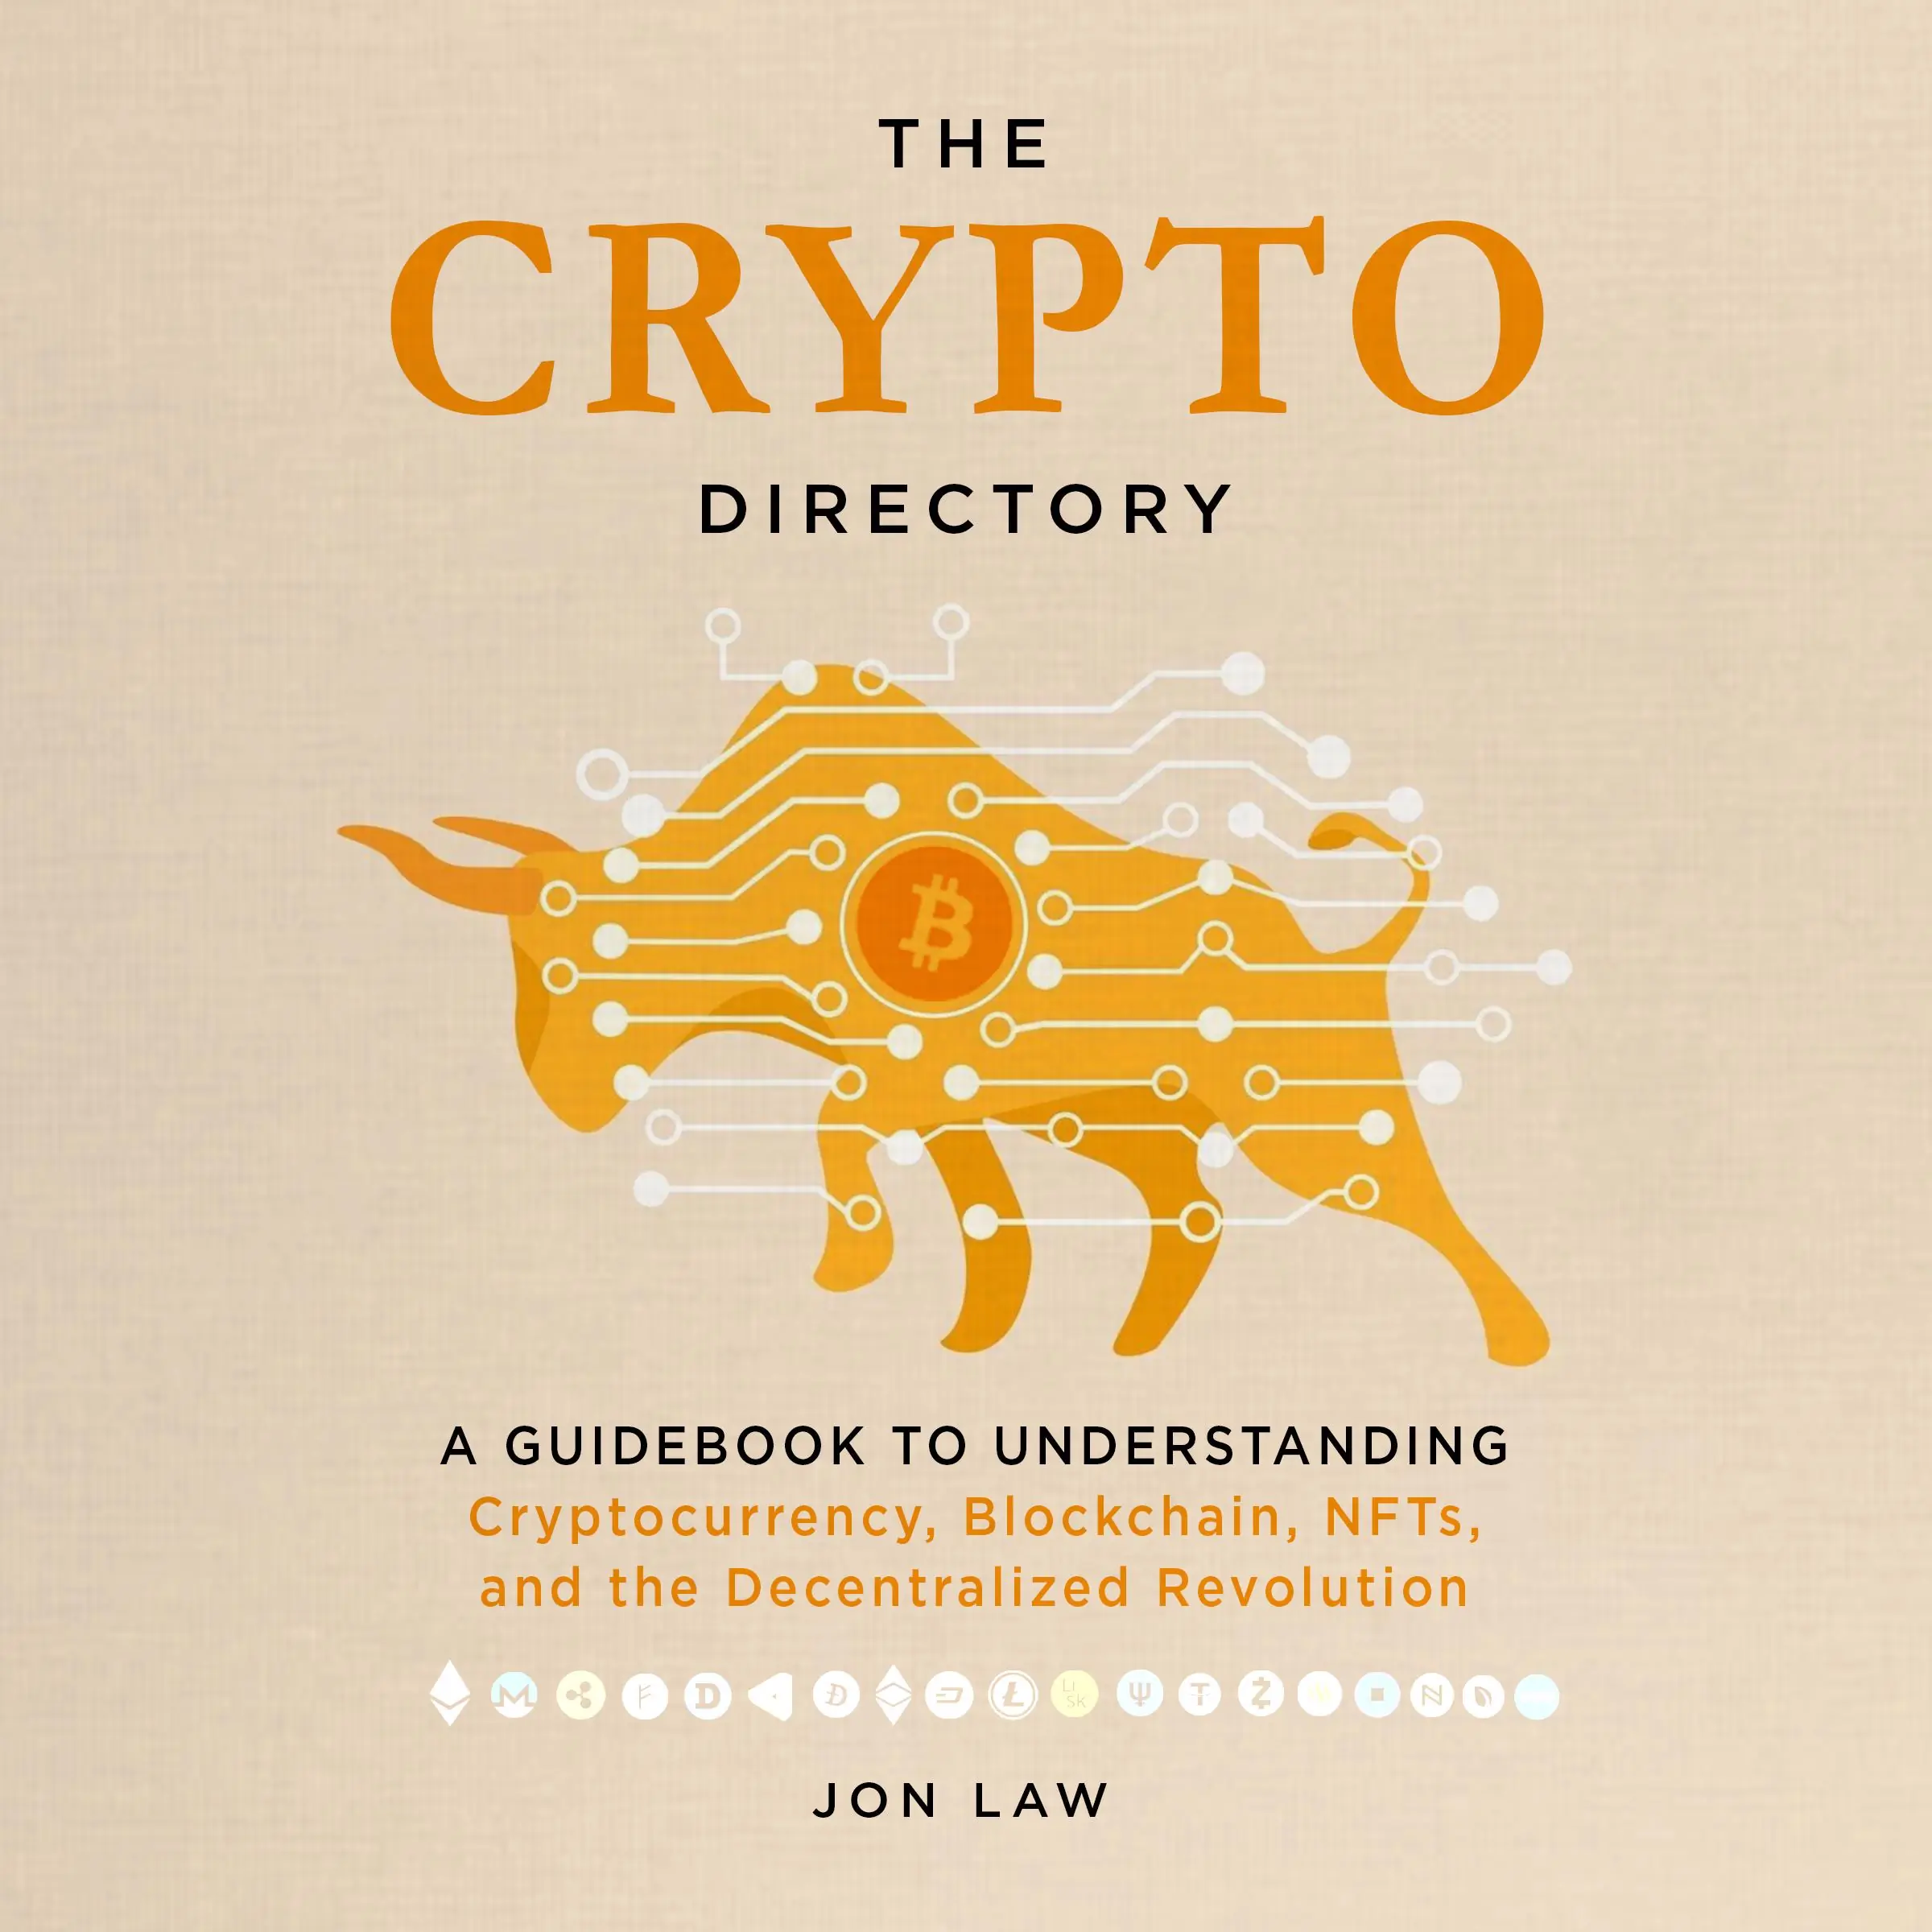 The Crypto Directory Audiobook by Jon Law